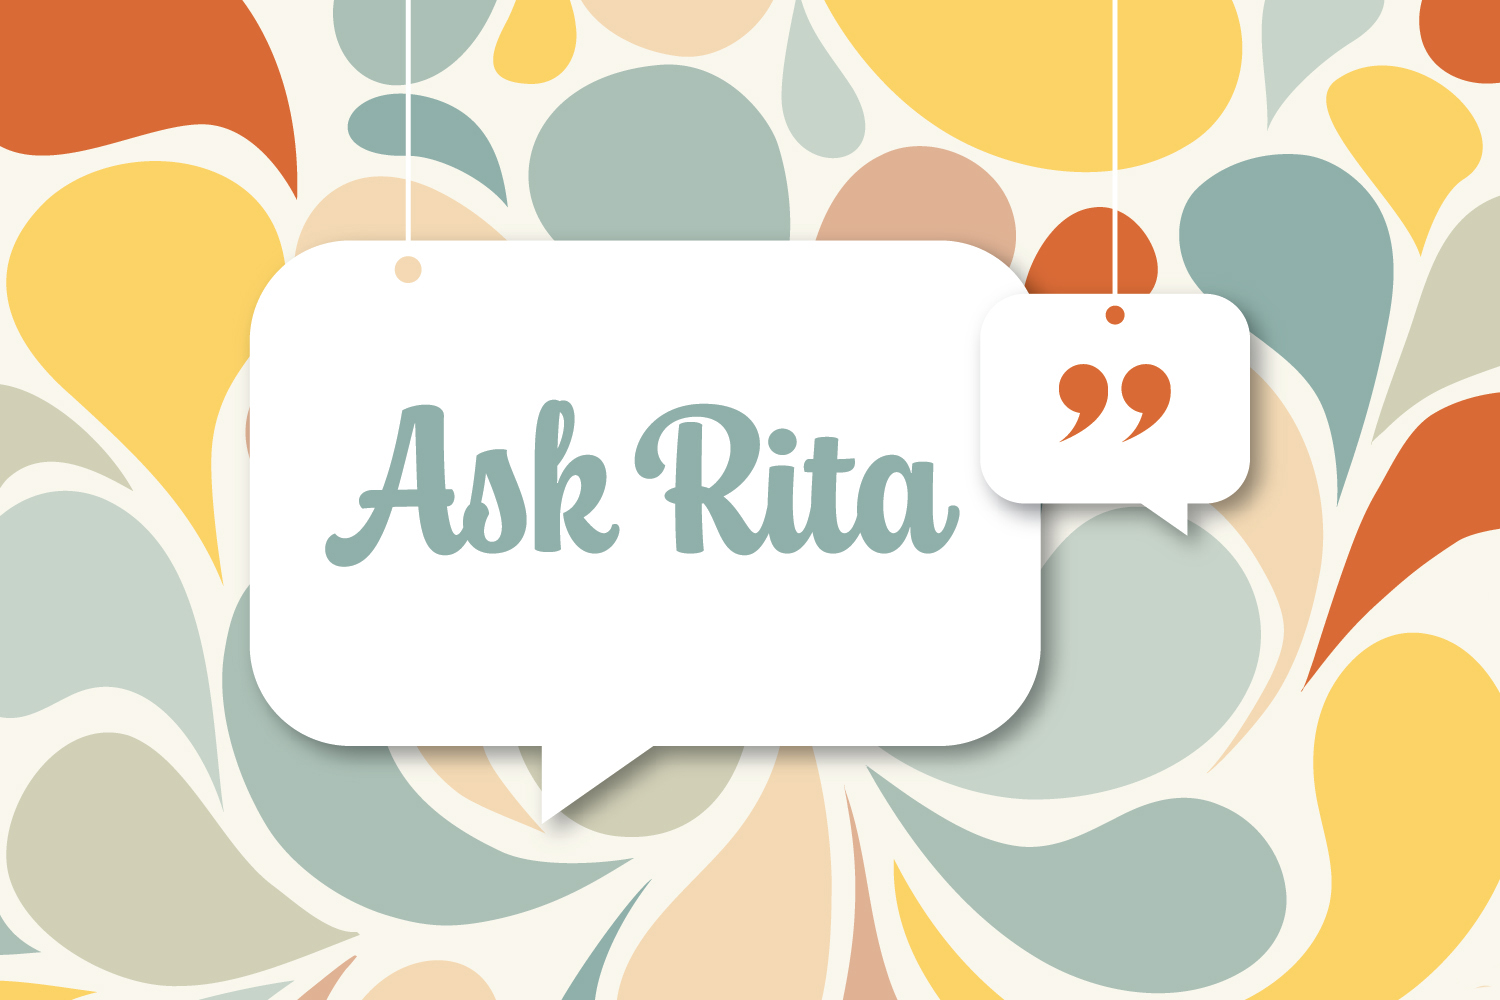 Ask Rita: Can We Discriminate in Favor of People with Disabilities?